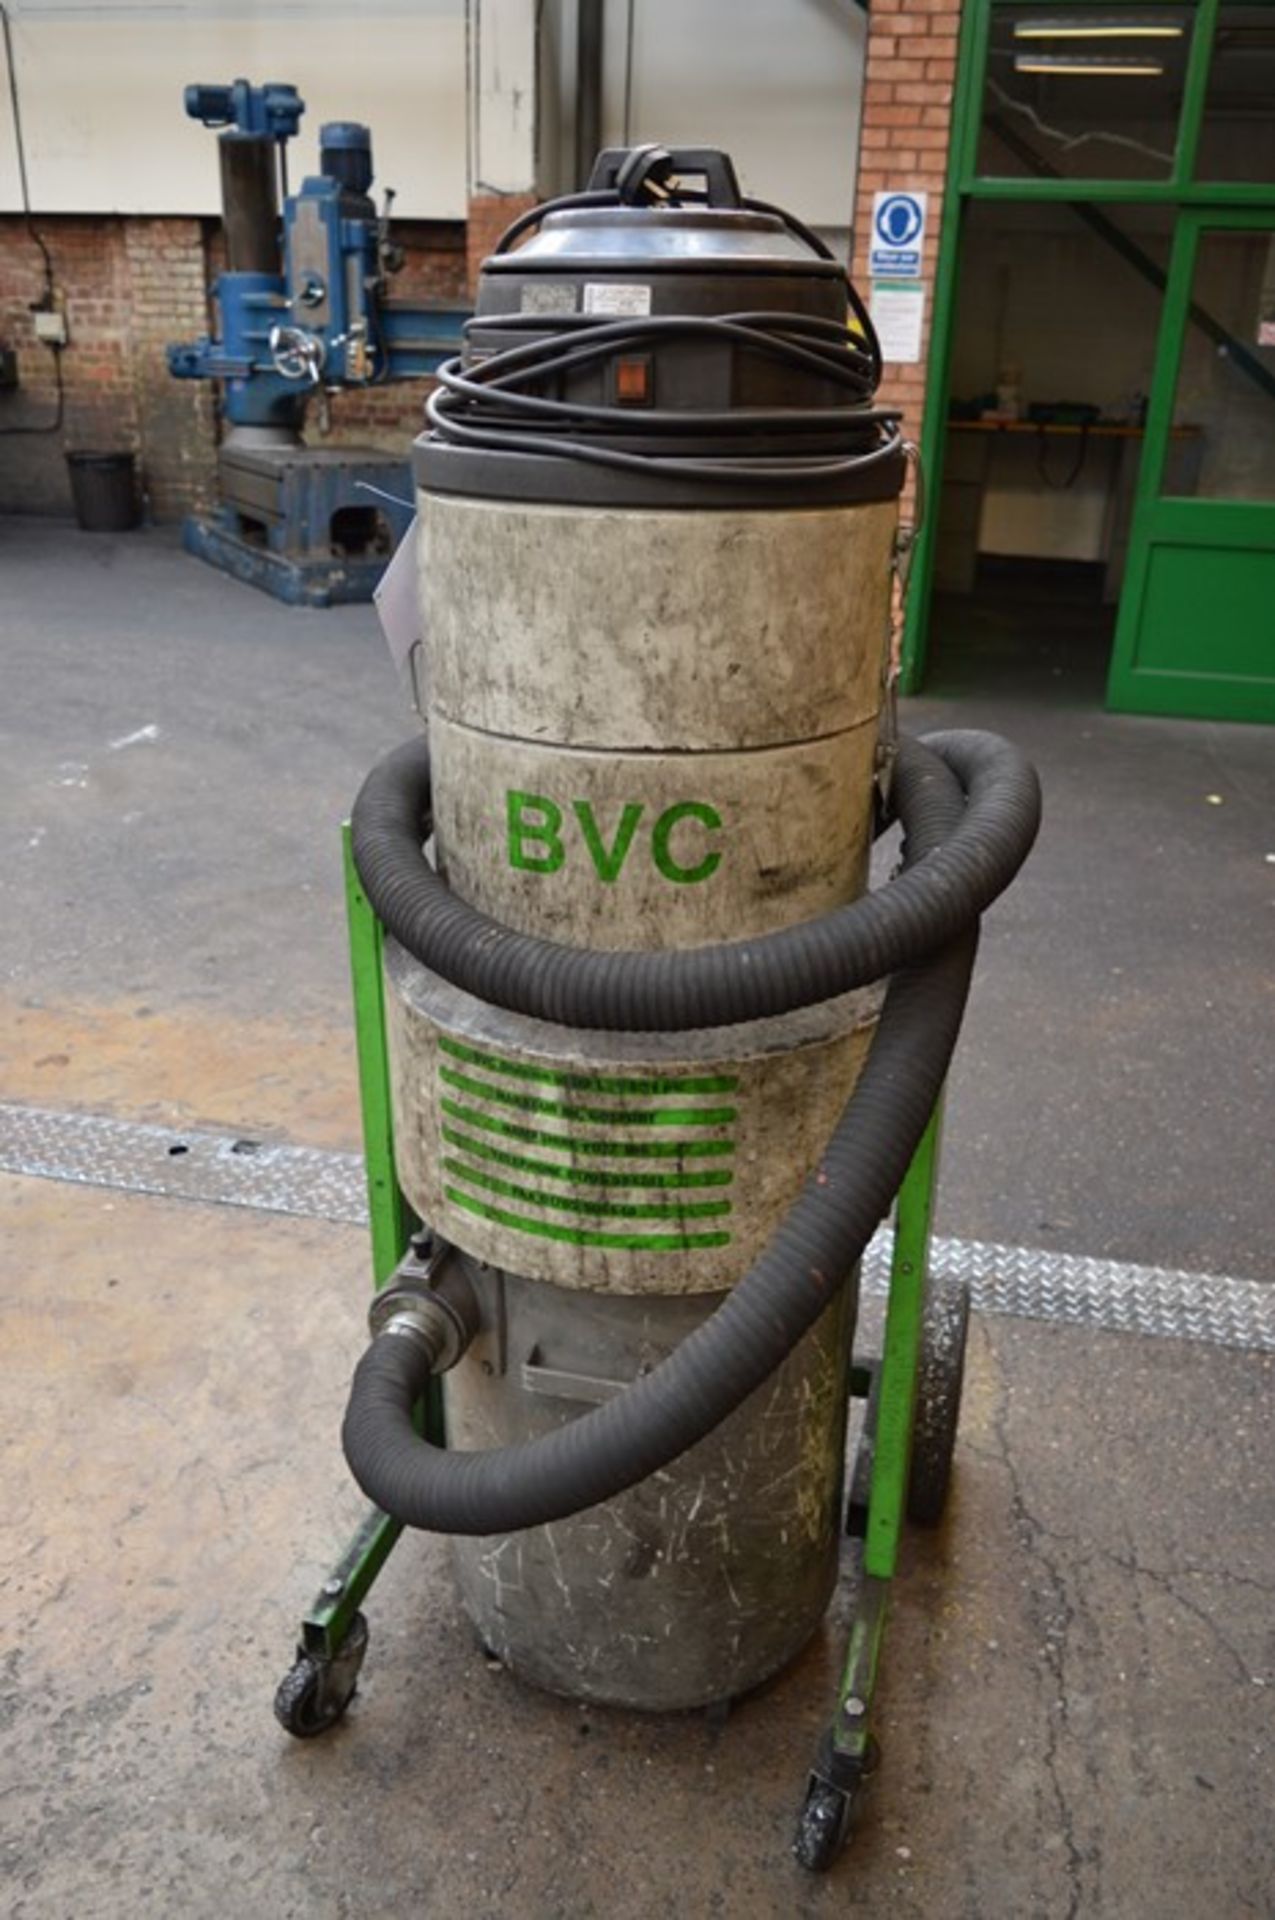 BVC, Model: 30872, mobile extractor, Serial No. 23000003